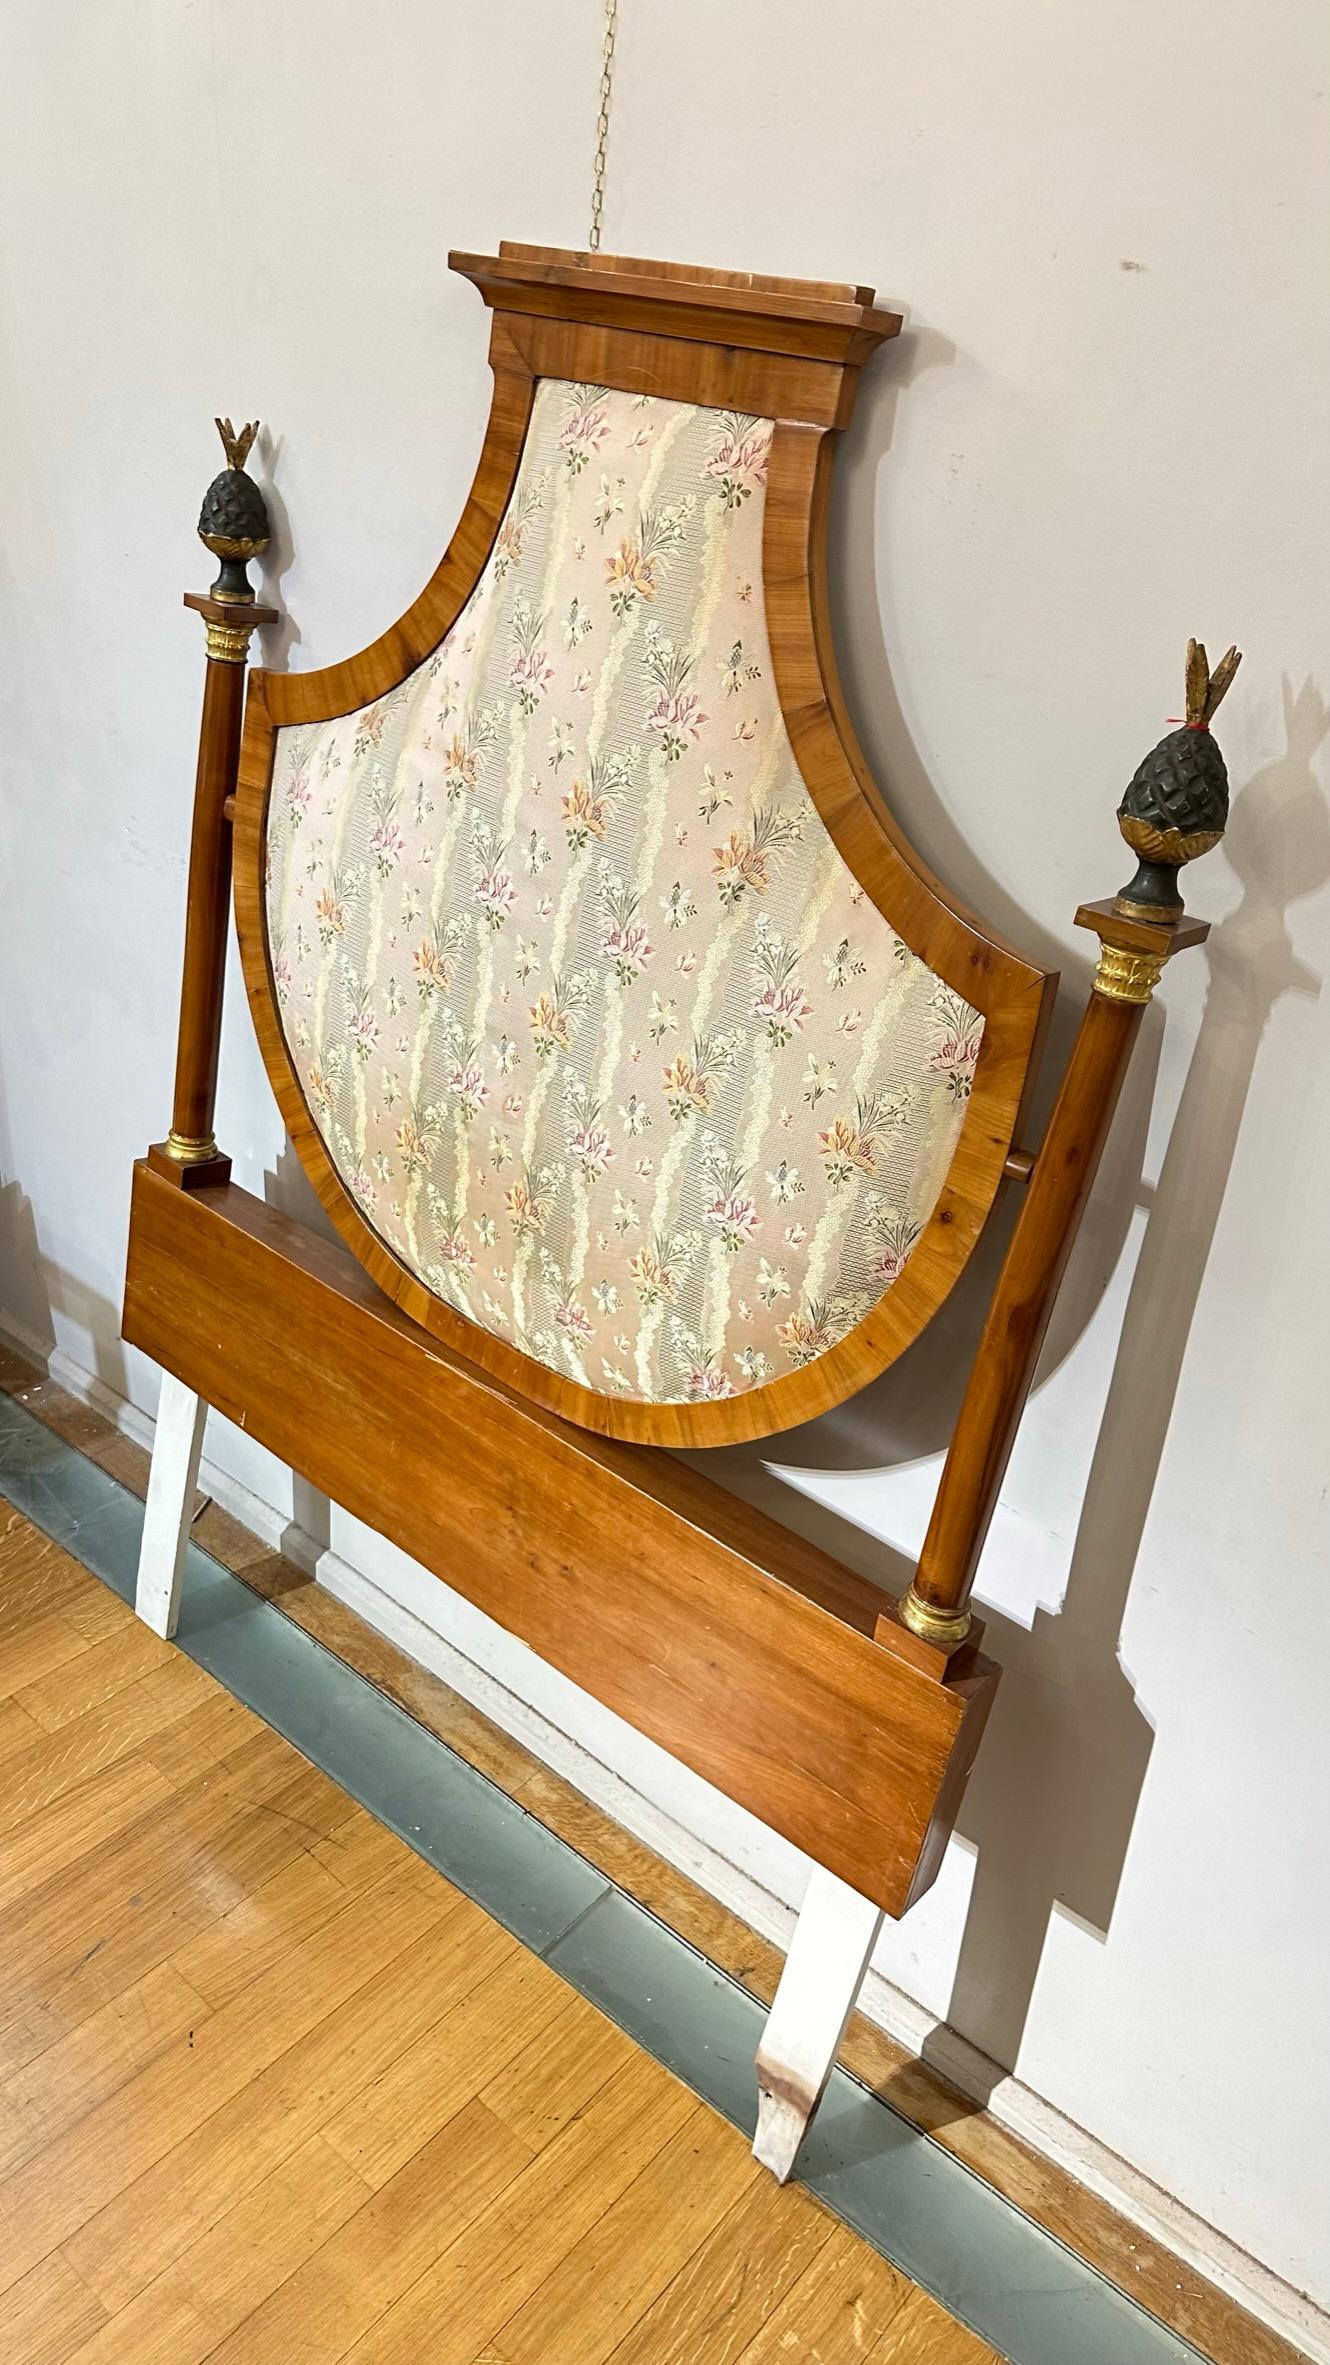 EARLY 19th CENTURY EMPIRE PERIOD BED HEADBOARD  For Sale 2